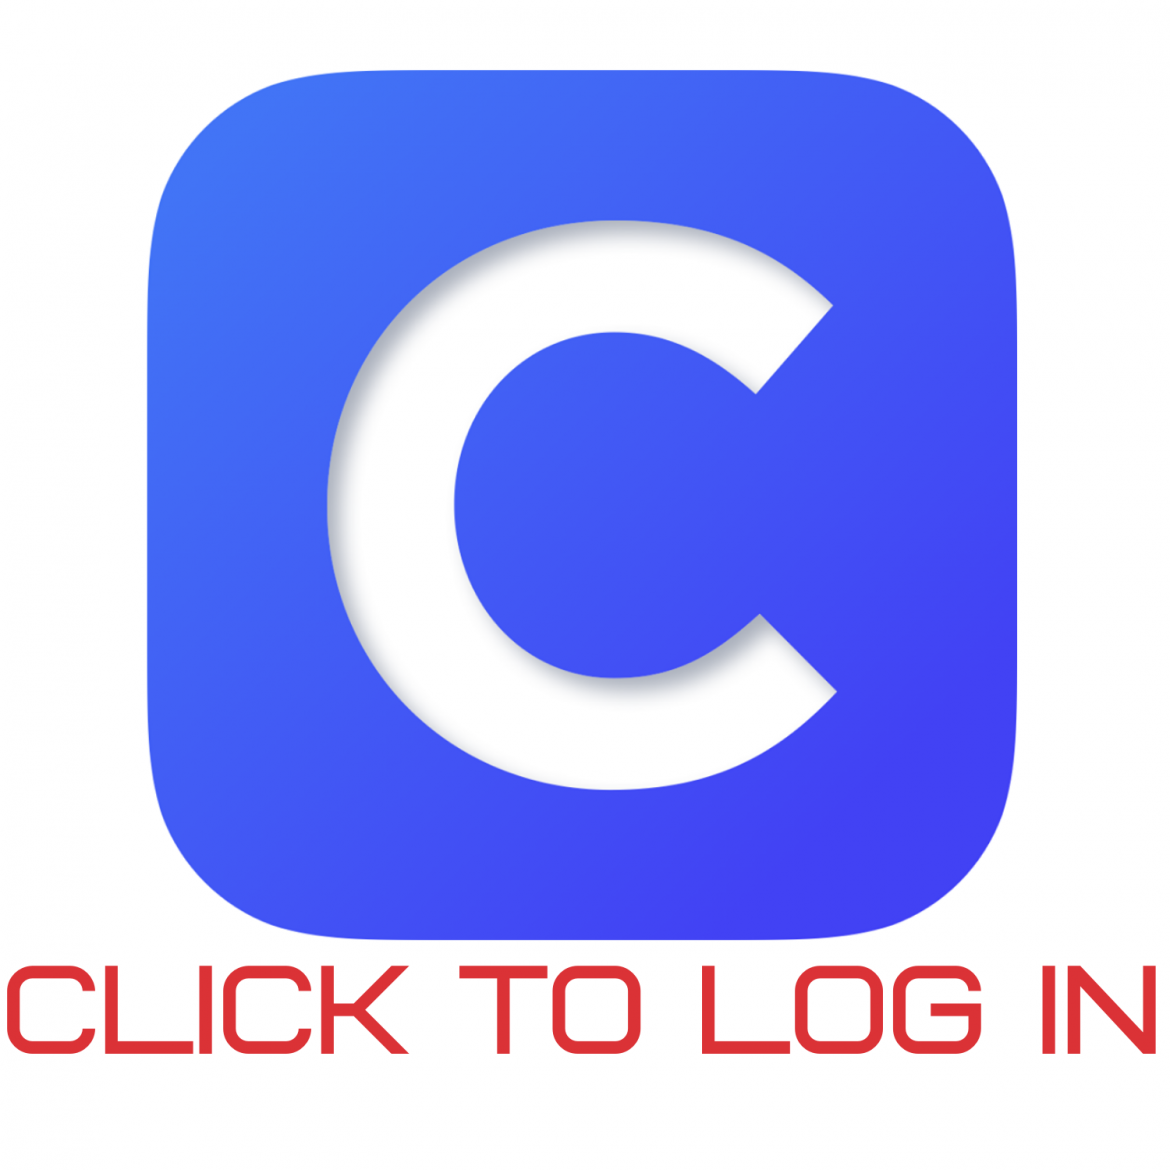 Clever logo with Click to Login